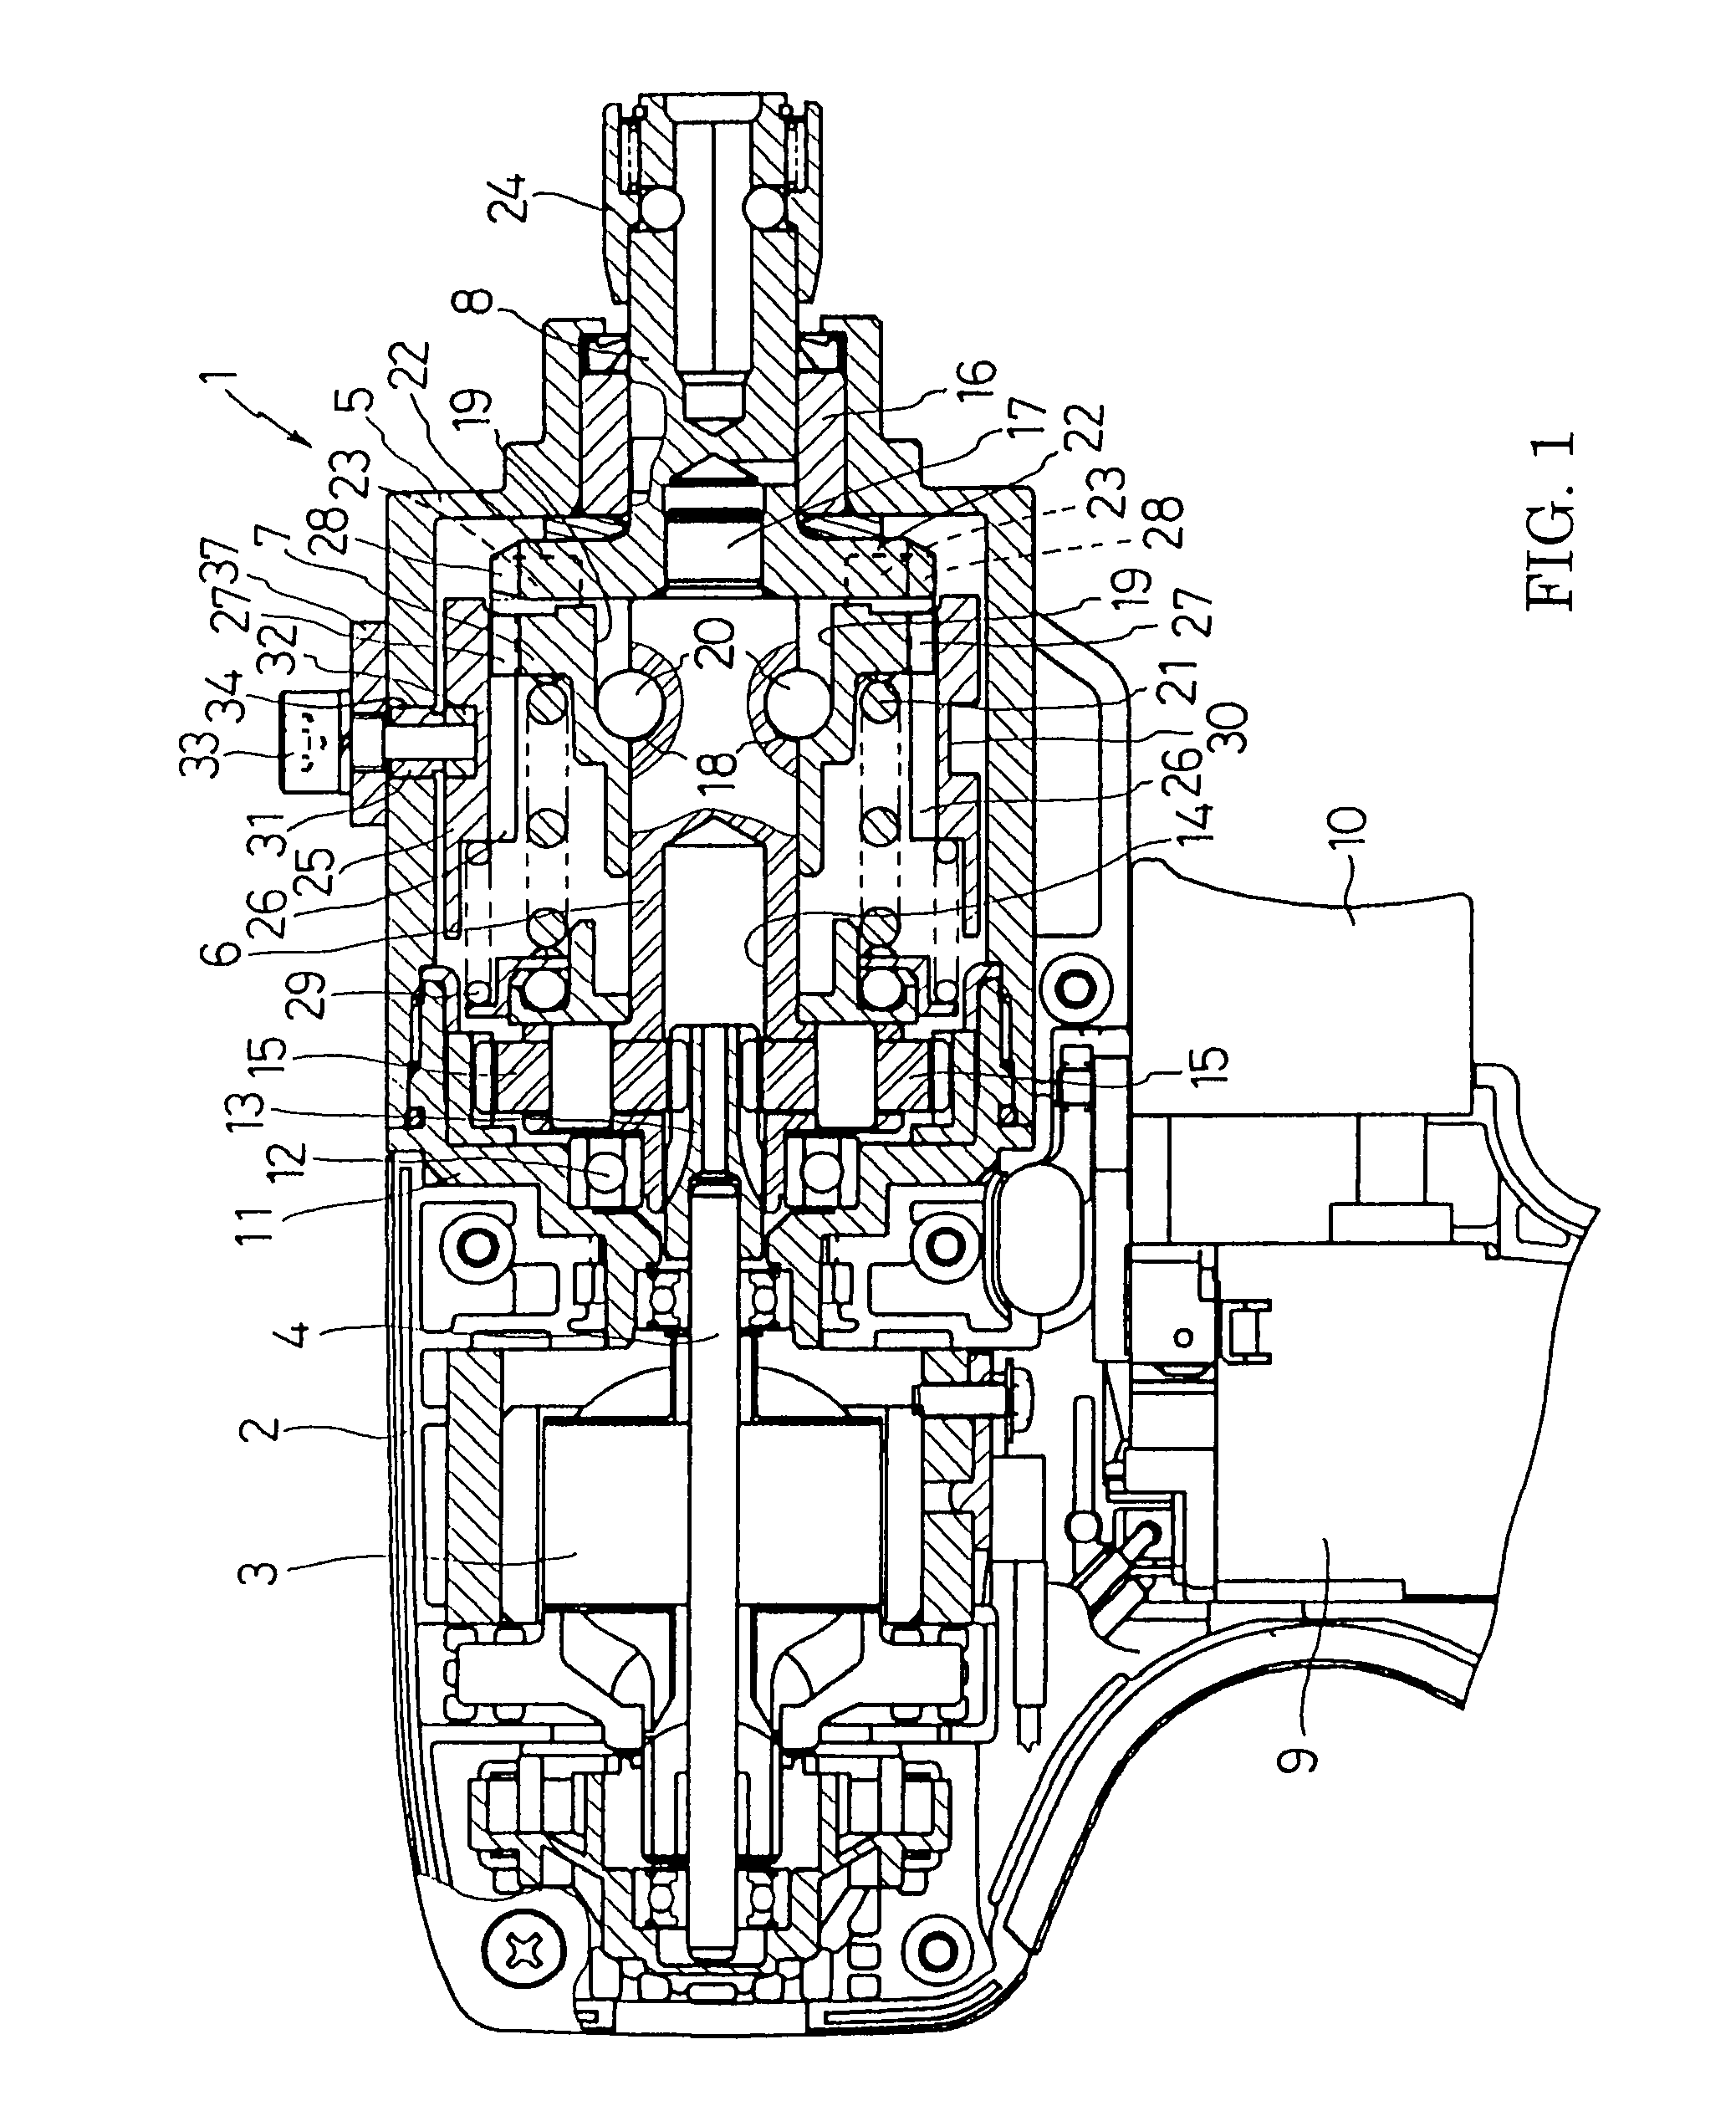 Impact driver having an external mechanism which operation mode can be selectively switched between impact and drill modes